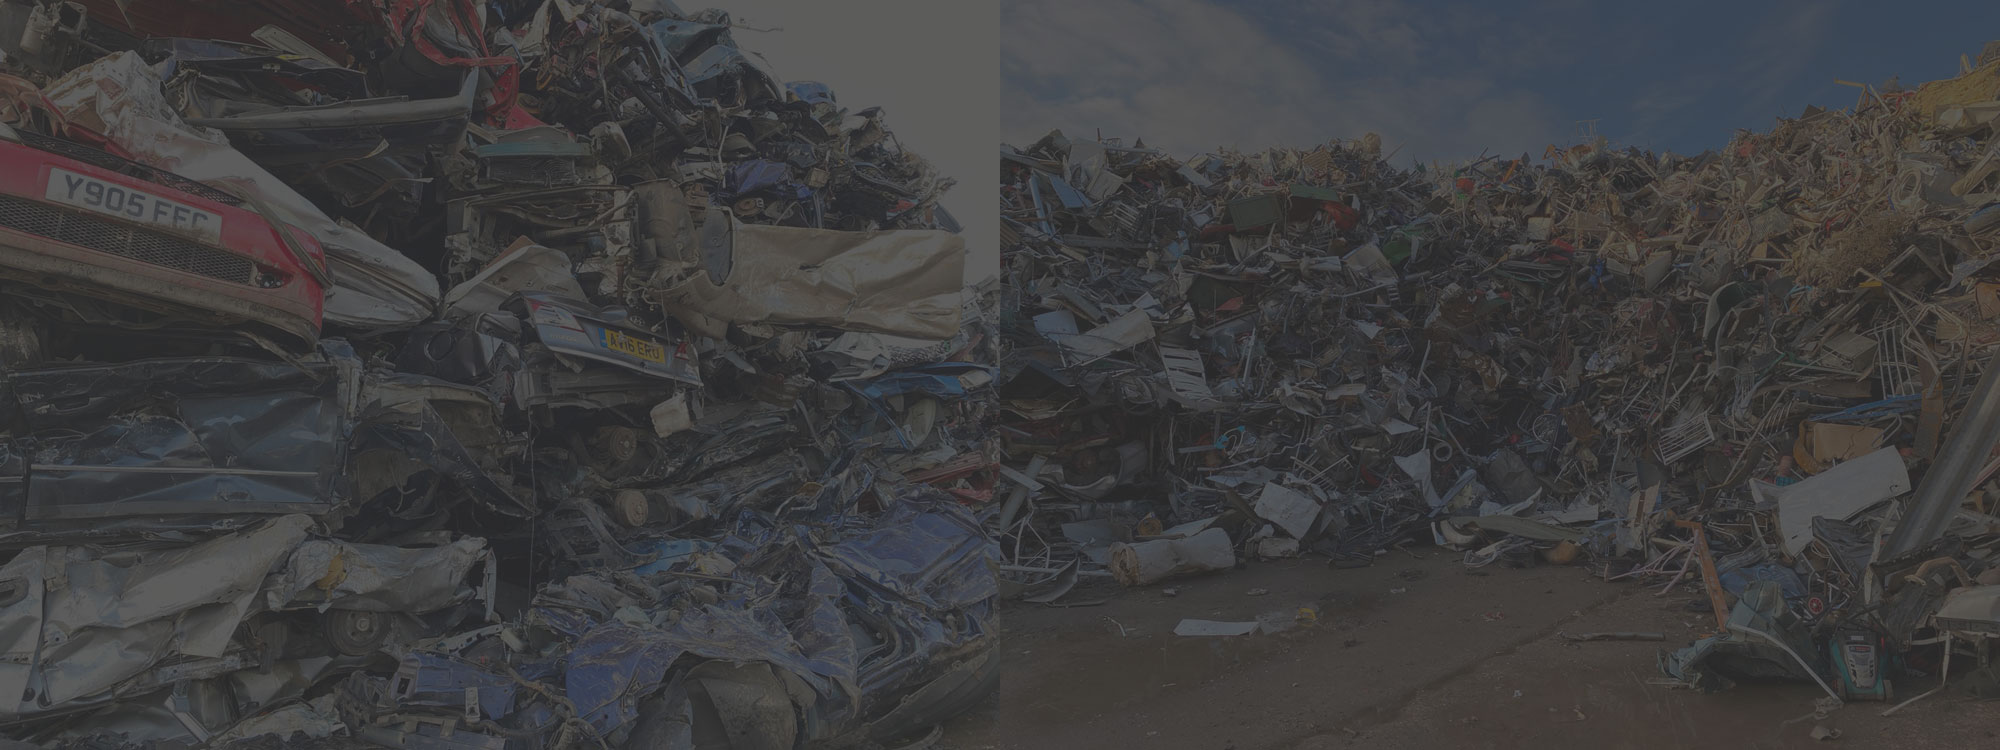 Scrap Metal Recycling for Bedford and surrounding areas